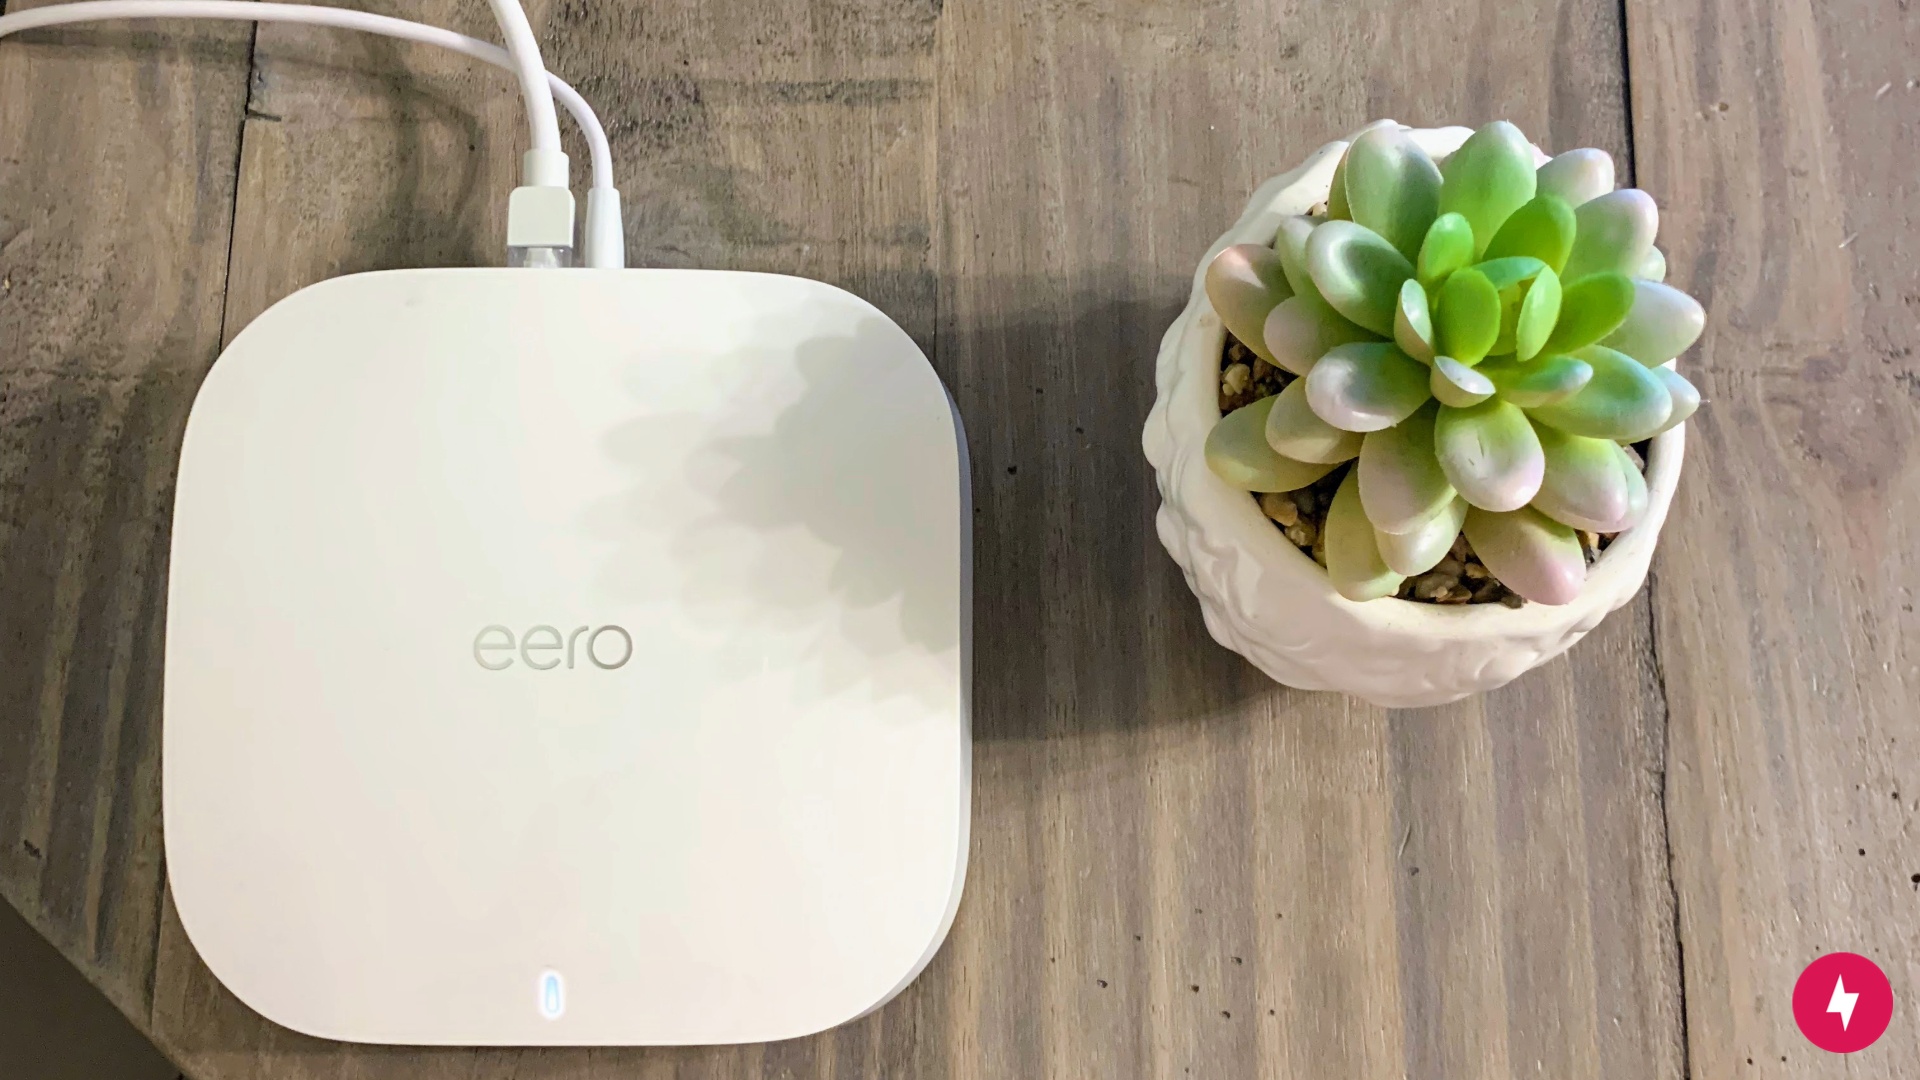 A white Eero router on a table beside a succulent plant.